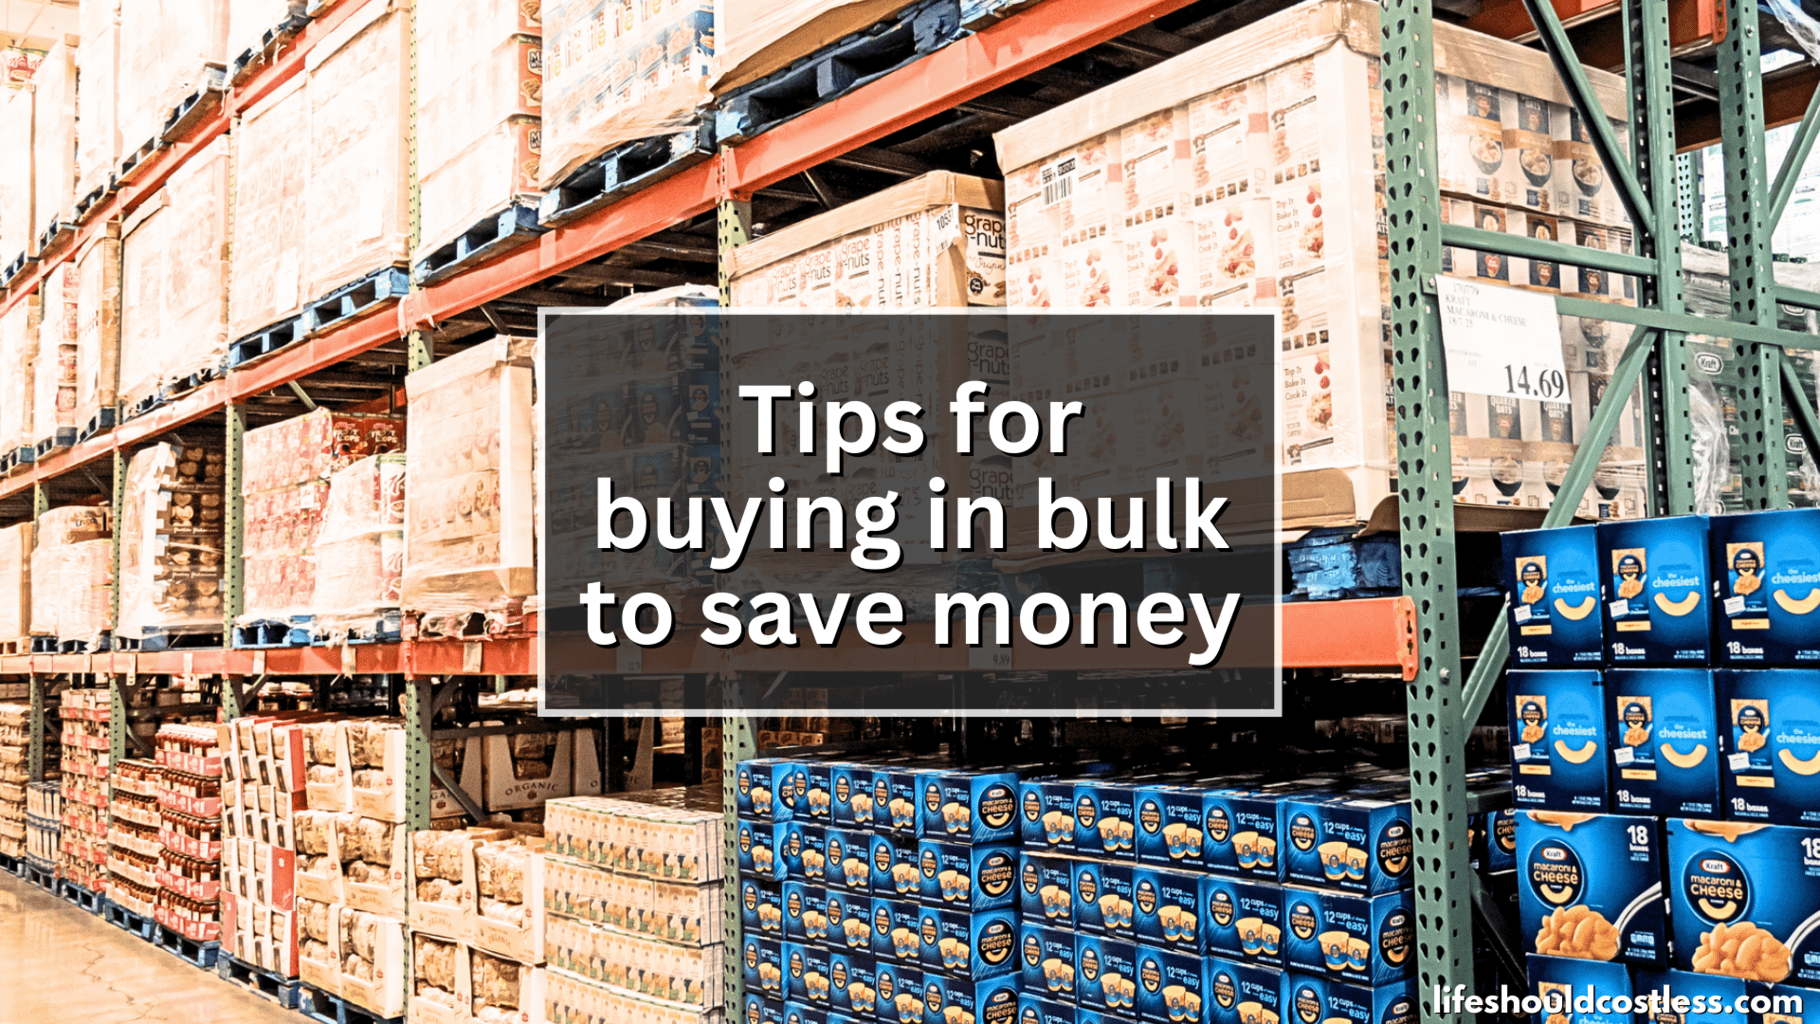 17 Foods and Household Things to Buy In Bulk To Save Money